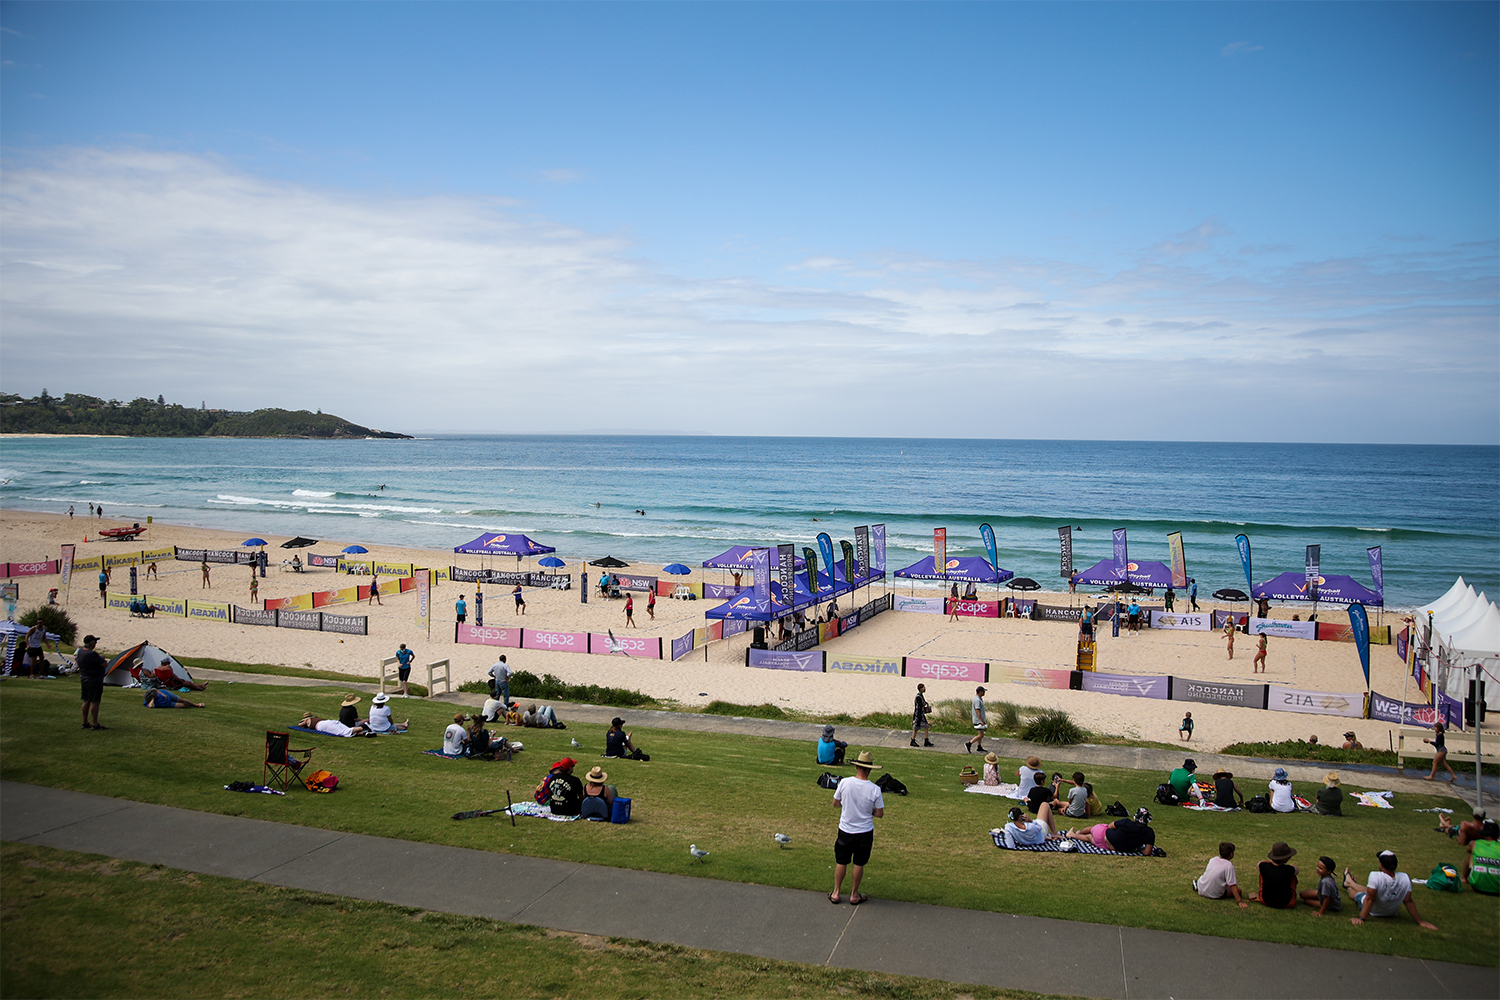 Volleyball event at Mollymook Beach